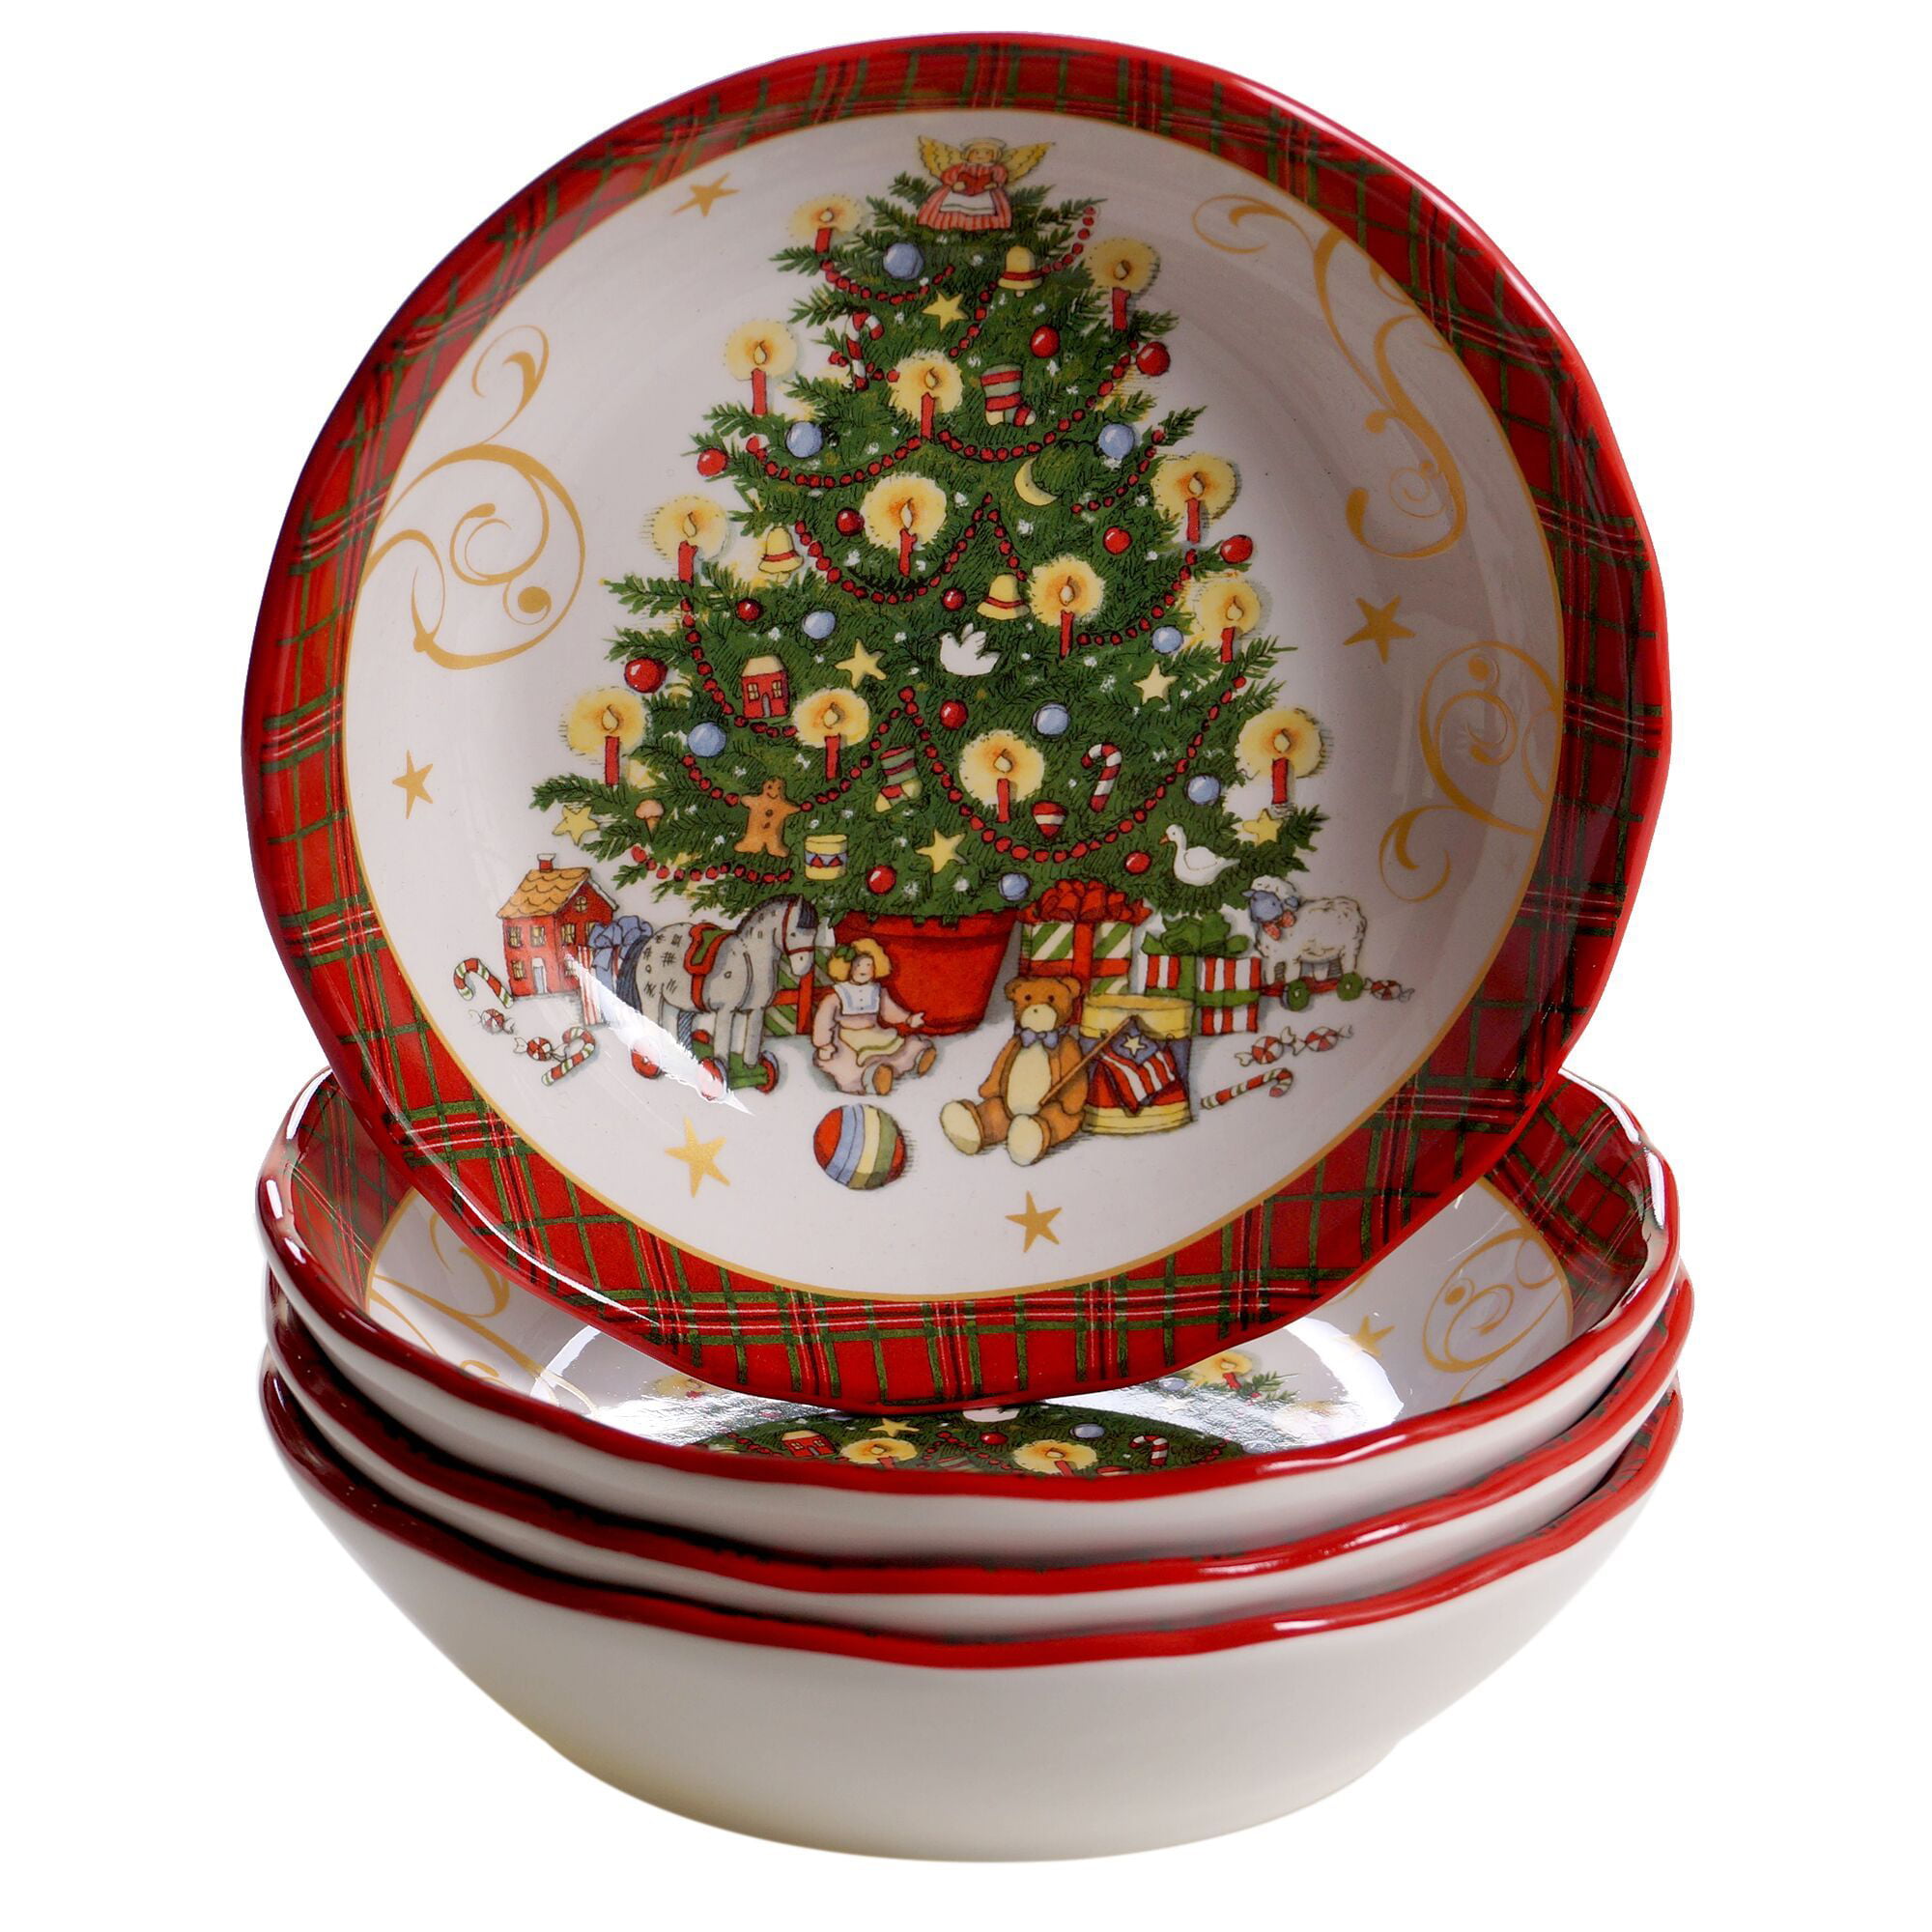 Holiday Party Supplies Christmas Candy Dishe Dip Bowl Set ~ 4-Pc Ceramic Christmas Dishes Christmas Tree